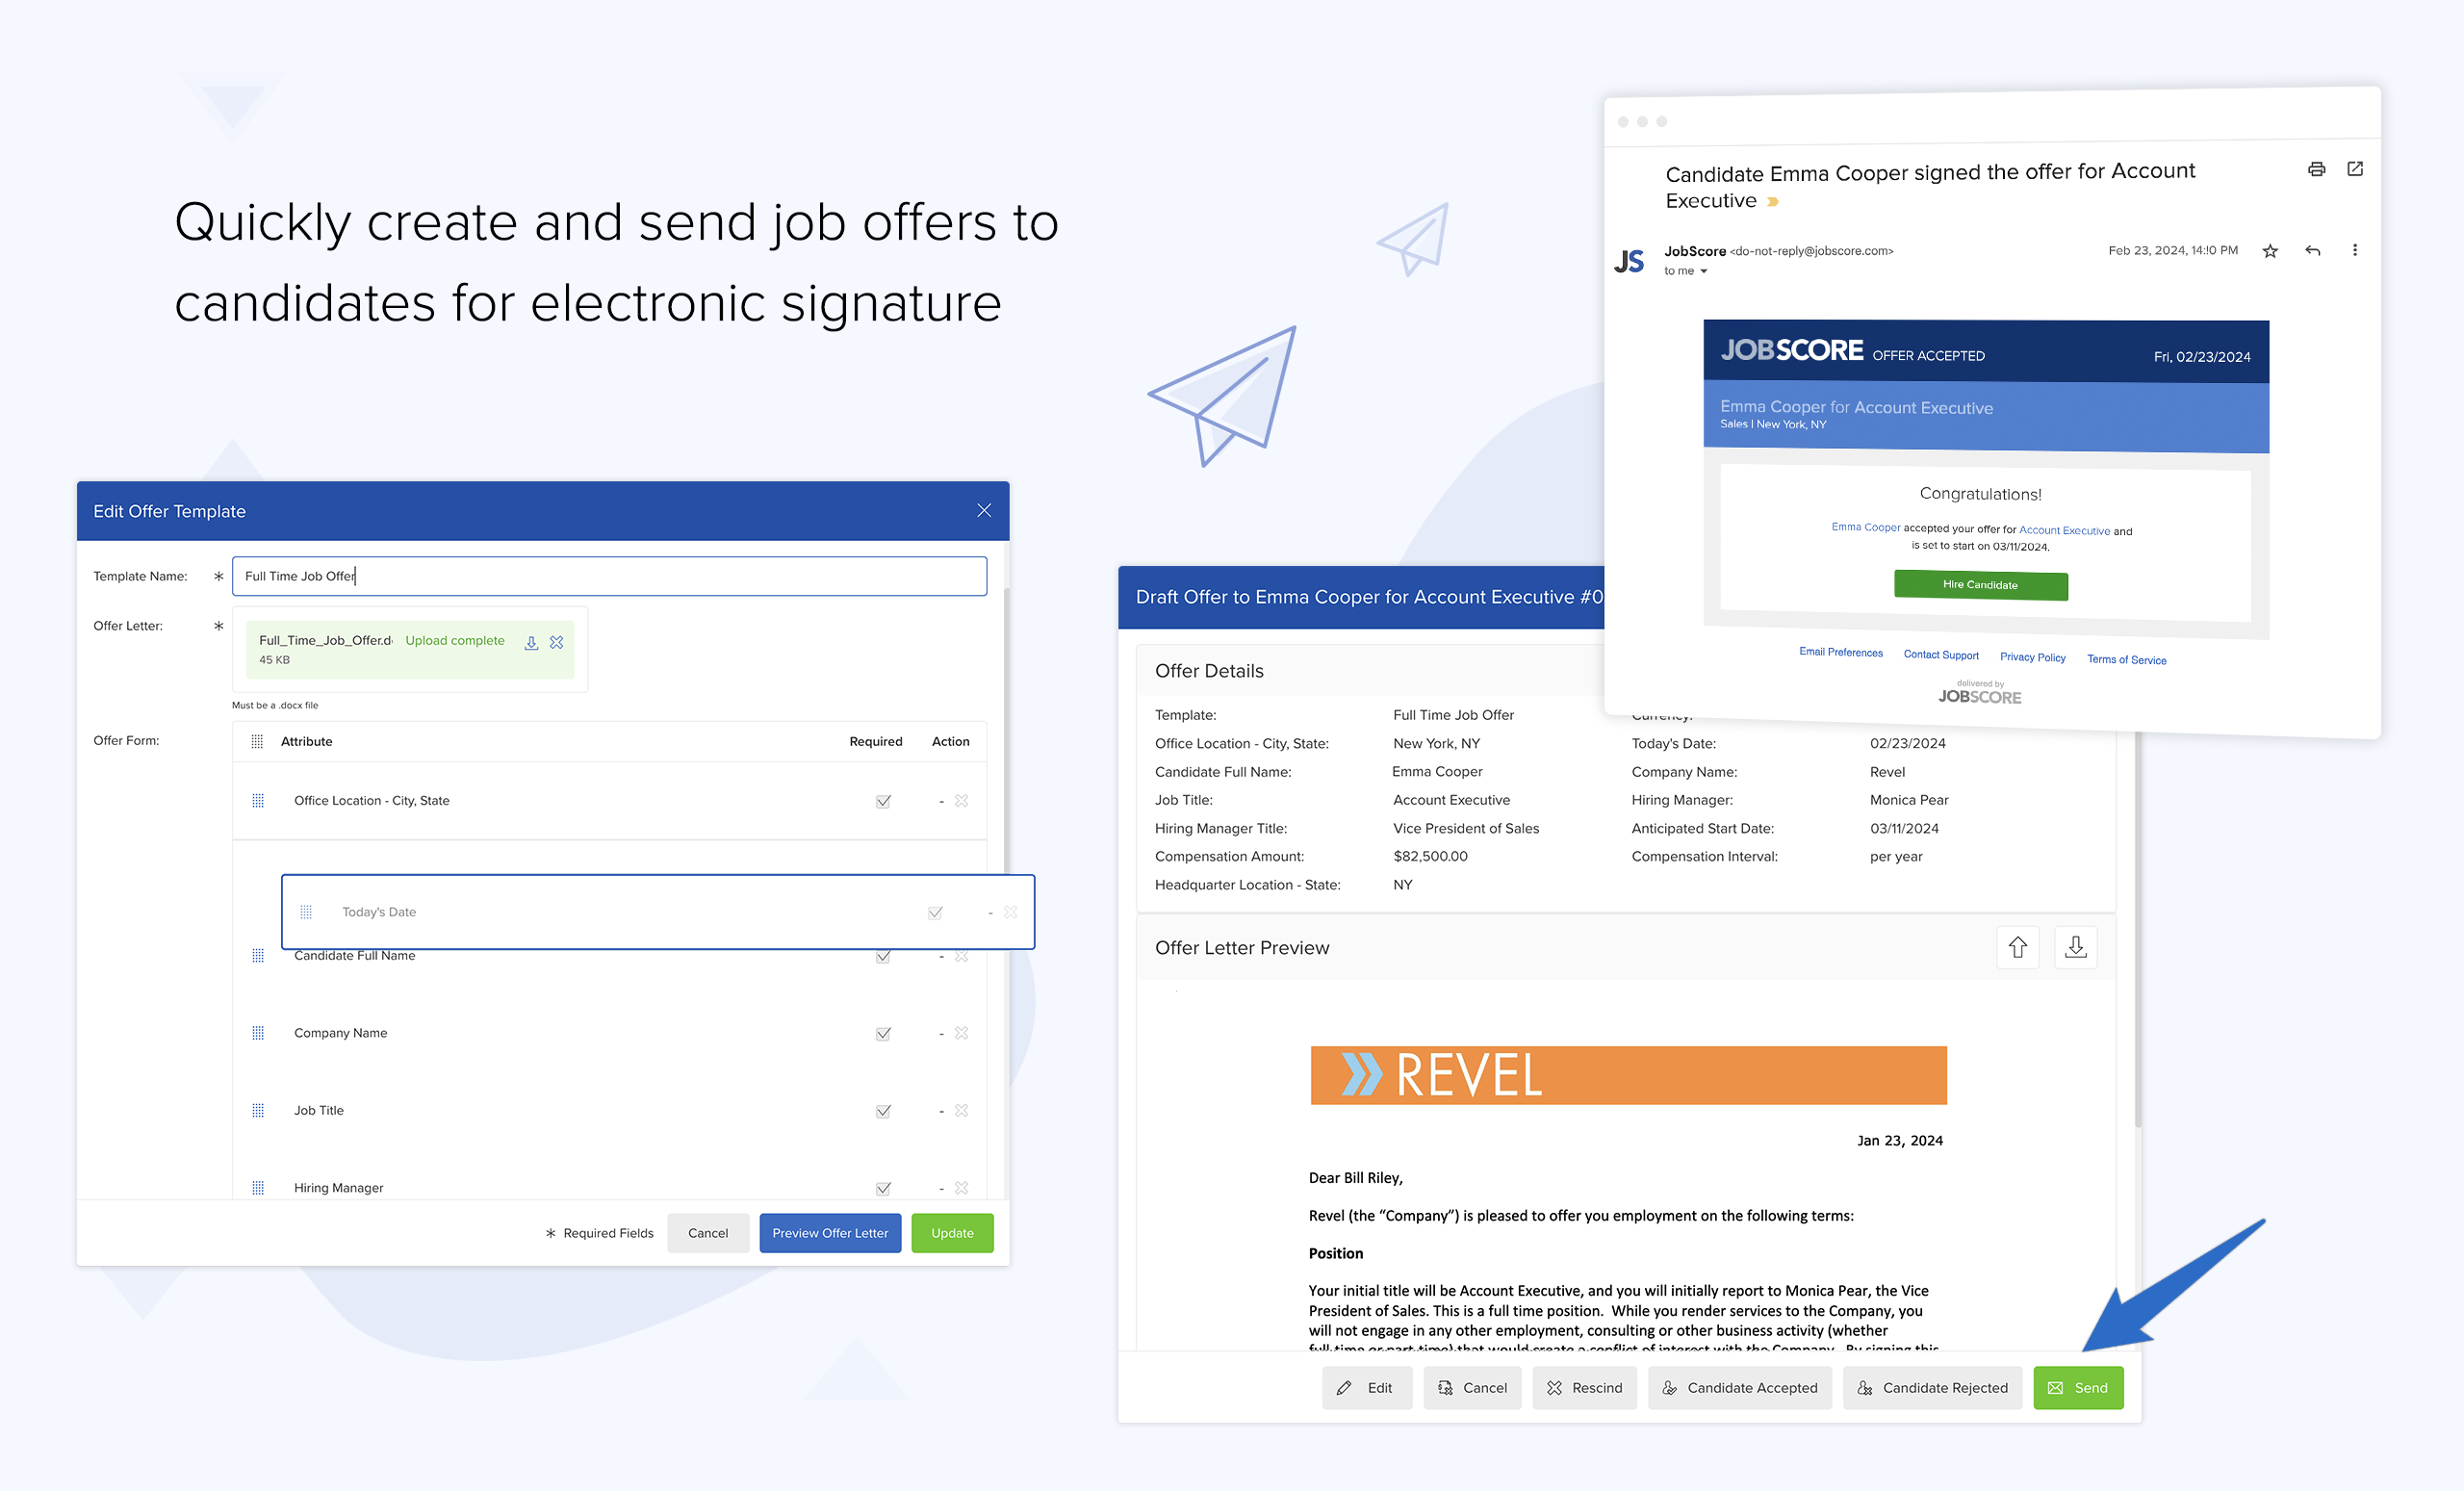 Quickly create and send job offers to candidates for electronic signature | recruiting software offers